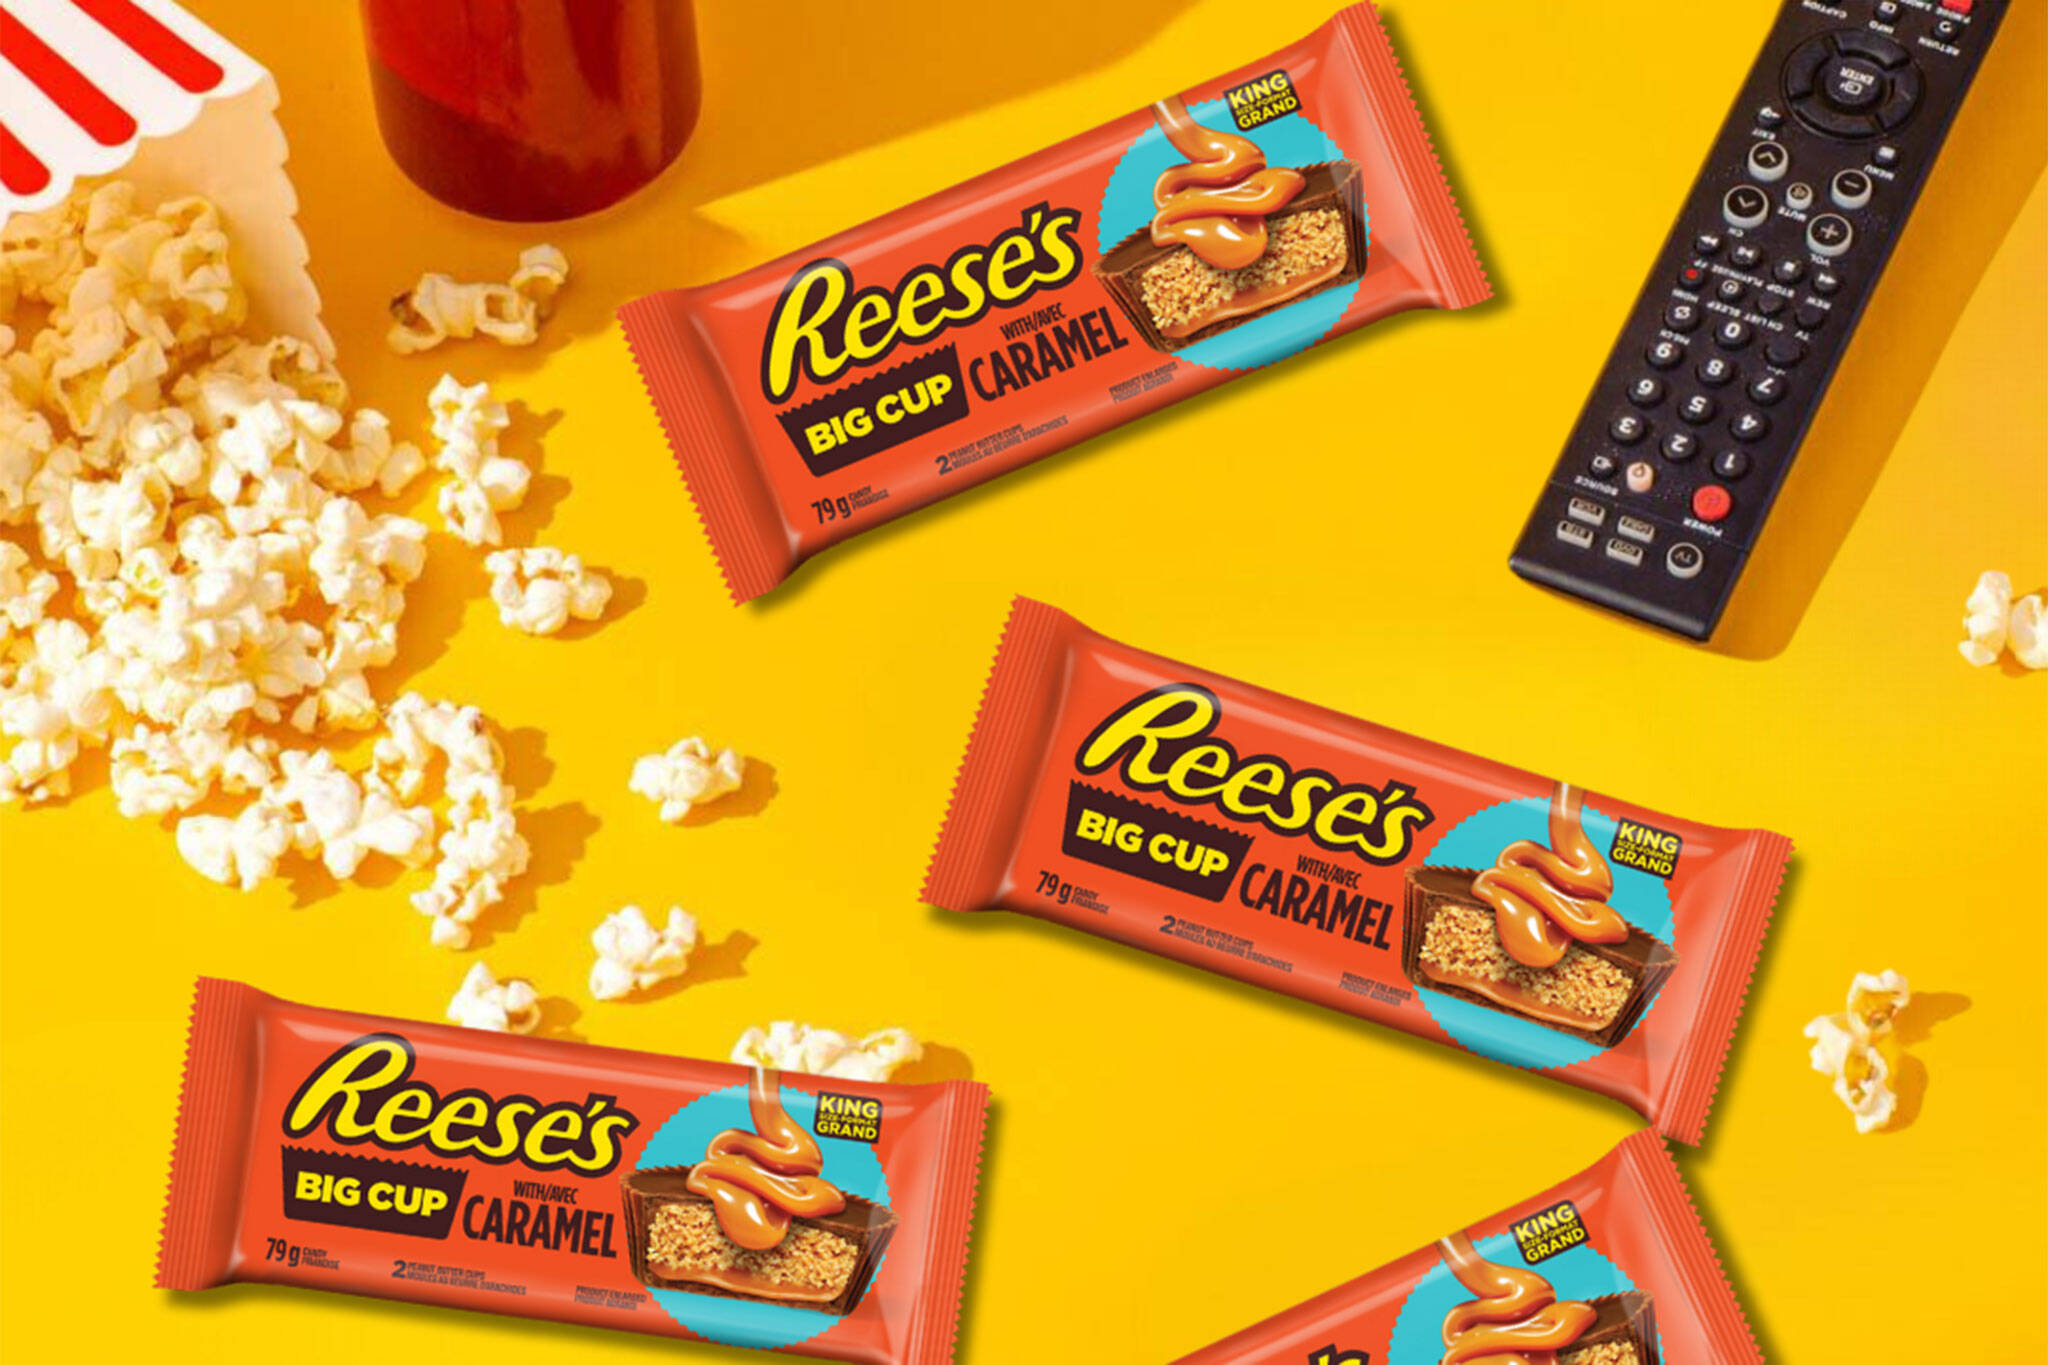 REESE'S newest flavour combo oozes into Toronto for National Caramel Day